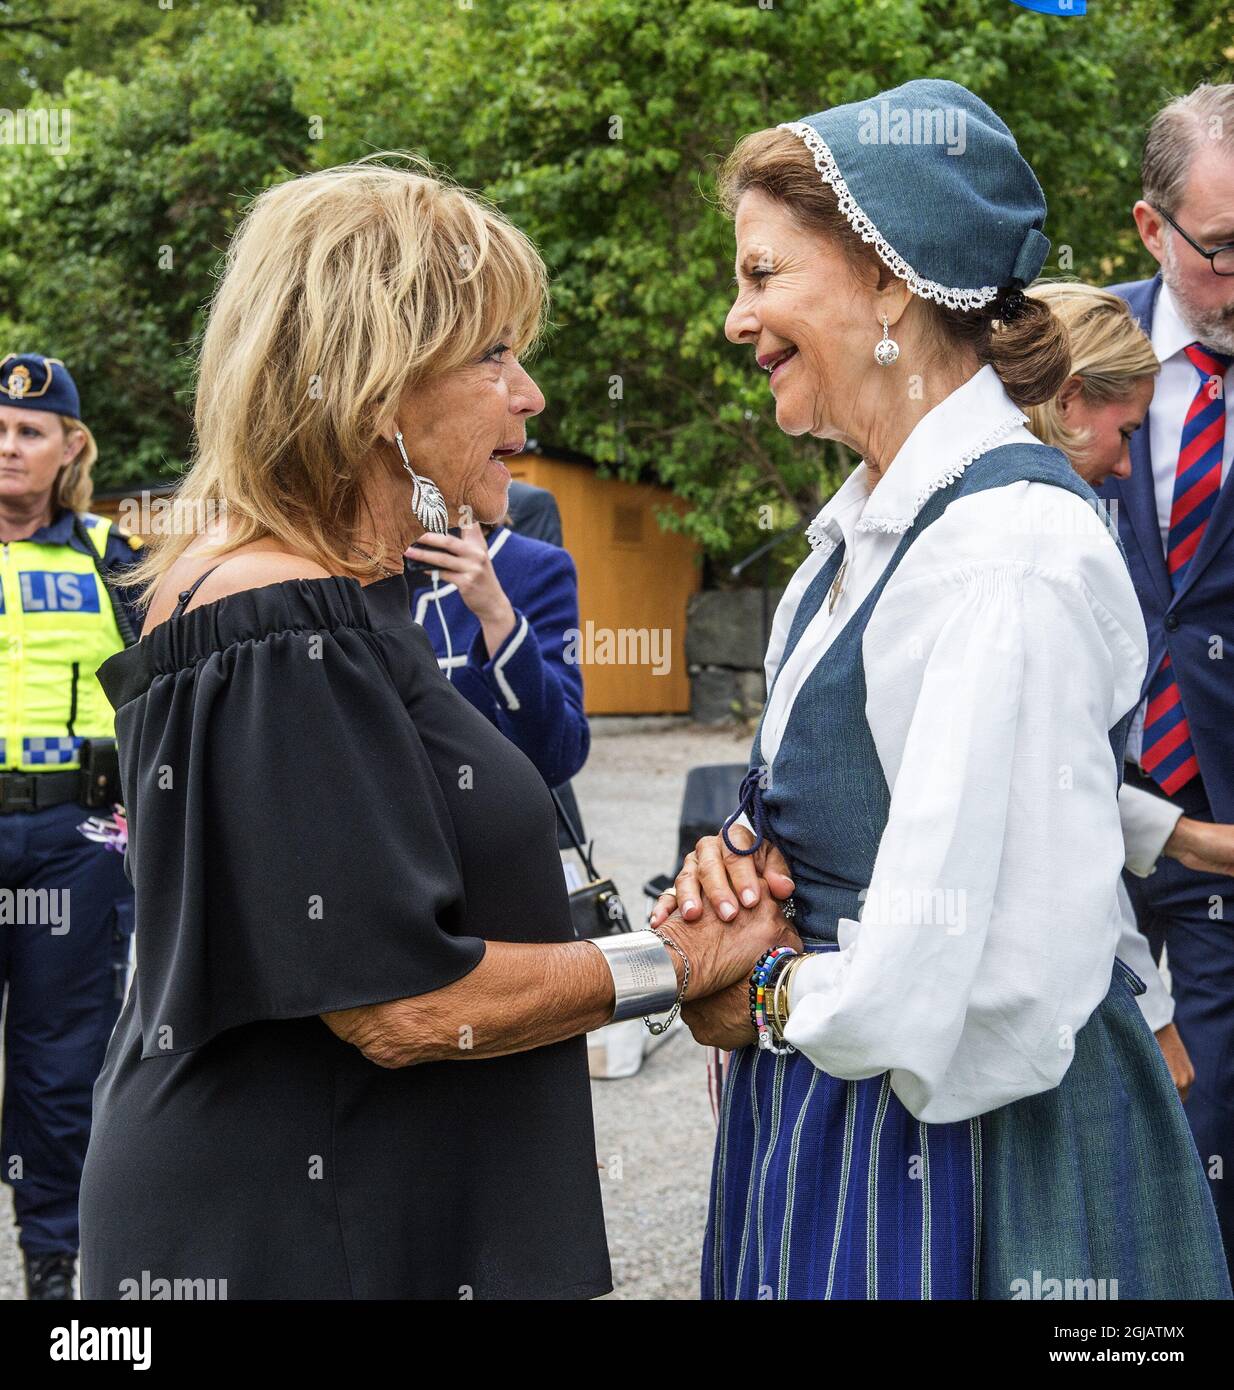 EKERO 2017-08-23 Queen Silvia with Sweden's artist and singer barbro 'Lill-Babs' Svensson attending the 'Old Peoples Day' at Ekebyhovs palace in Ekero, Sweden on Wednesday. Foto: Anna-Karin Nilsson/ EXP / TT / kod 7141 ** OUT SWEDEN OUT**  Stock Photo